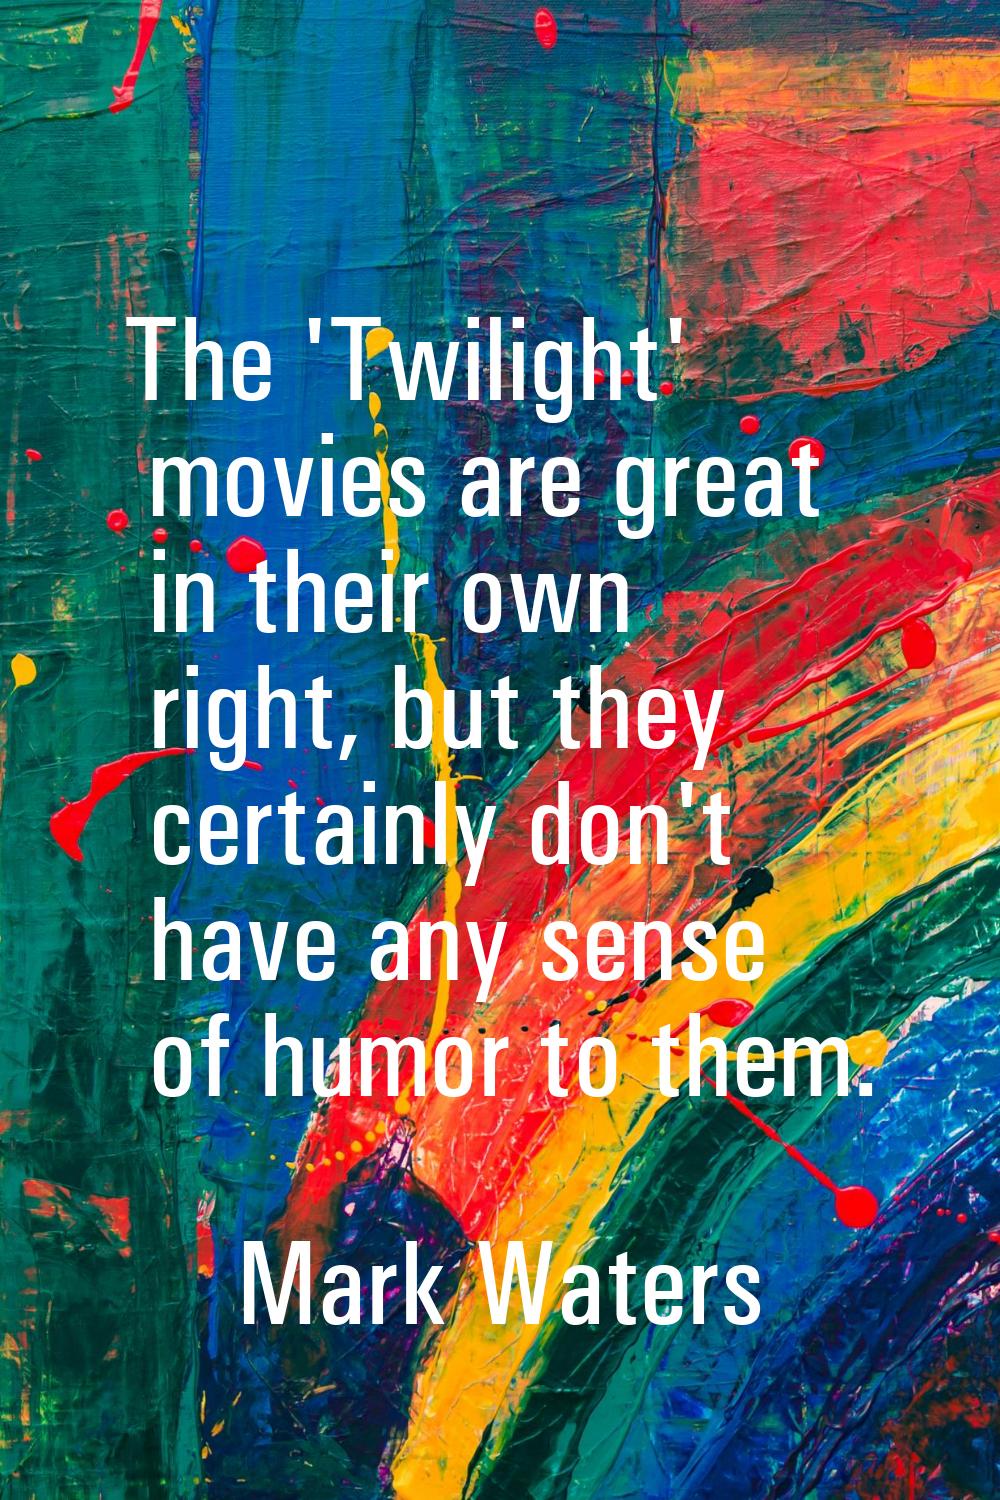 The 'Twilight' movies are great in their own right, but they certainly don't have any sense of humo